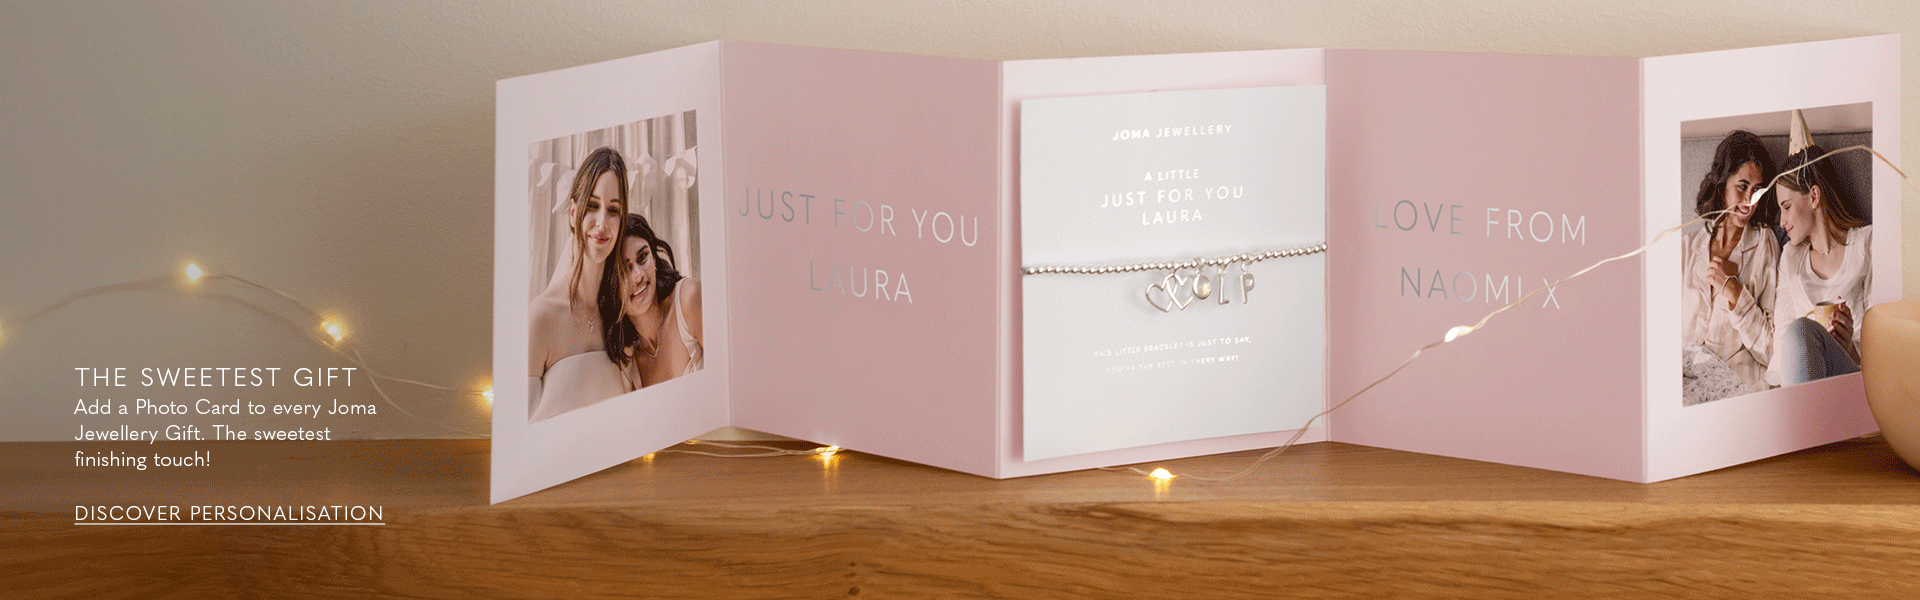 image of a personalised photo card with a silver charm bracelet with individual charms and september birthstone. The card also has a personalised message